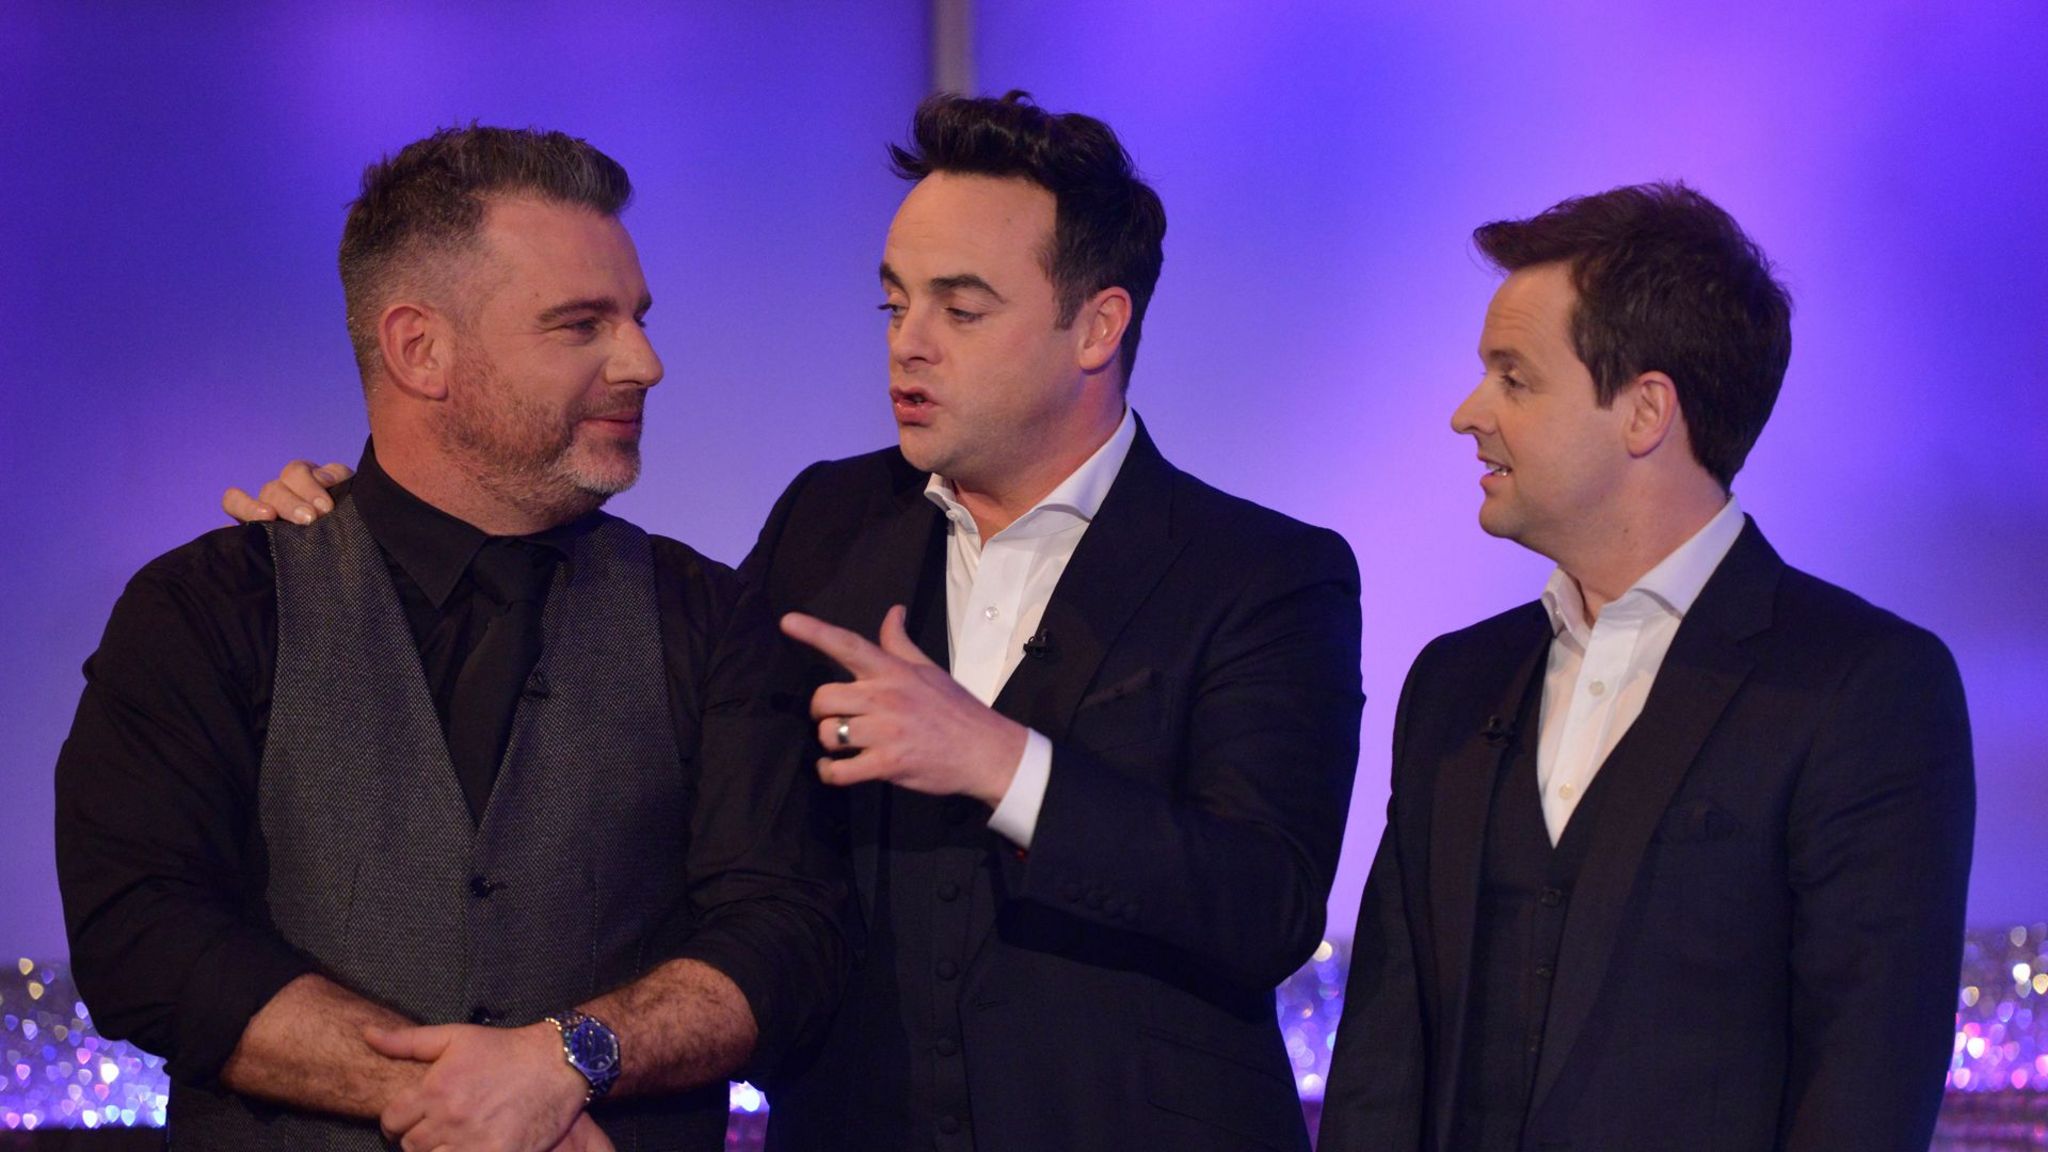 Andy Collins with Ant & Dec on stage at Saturday Night Takeaway